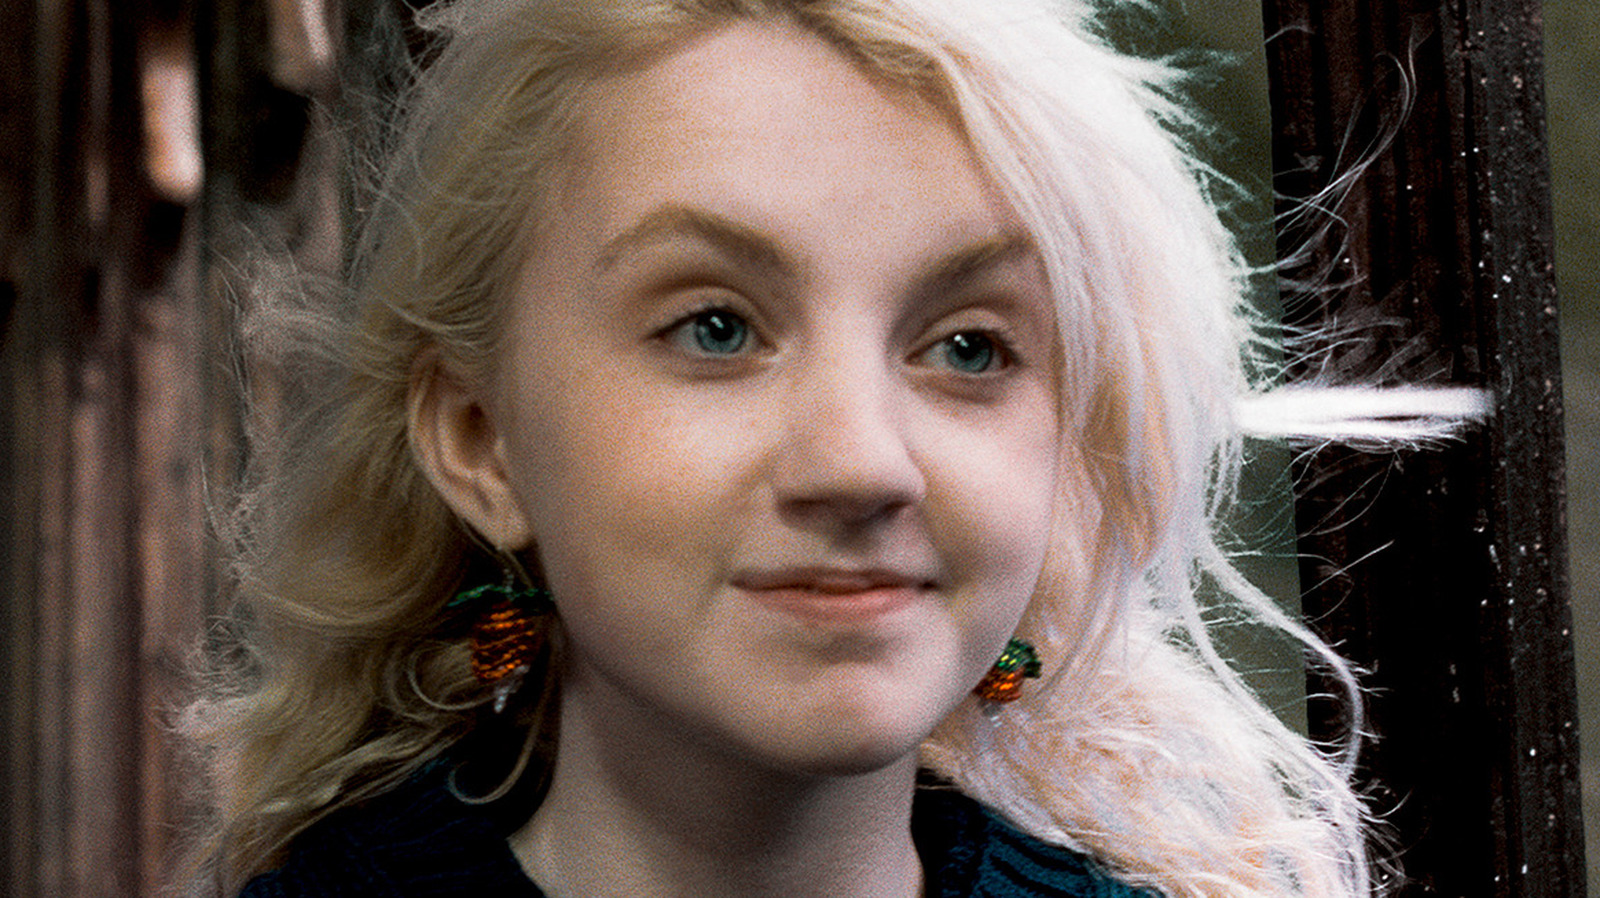 anjali kriplani recommends Pics Of Luna Lovegood From Harry Potter